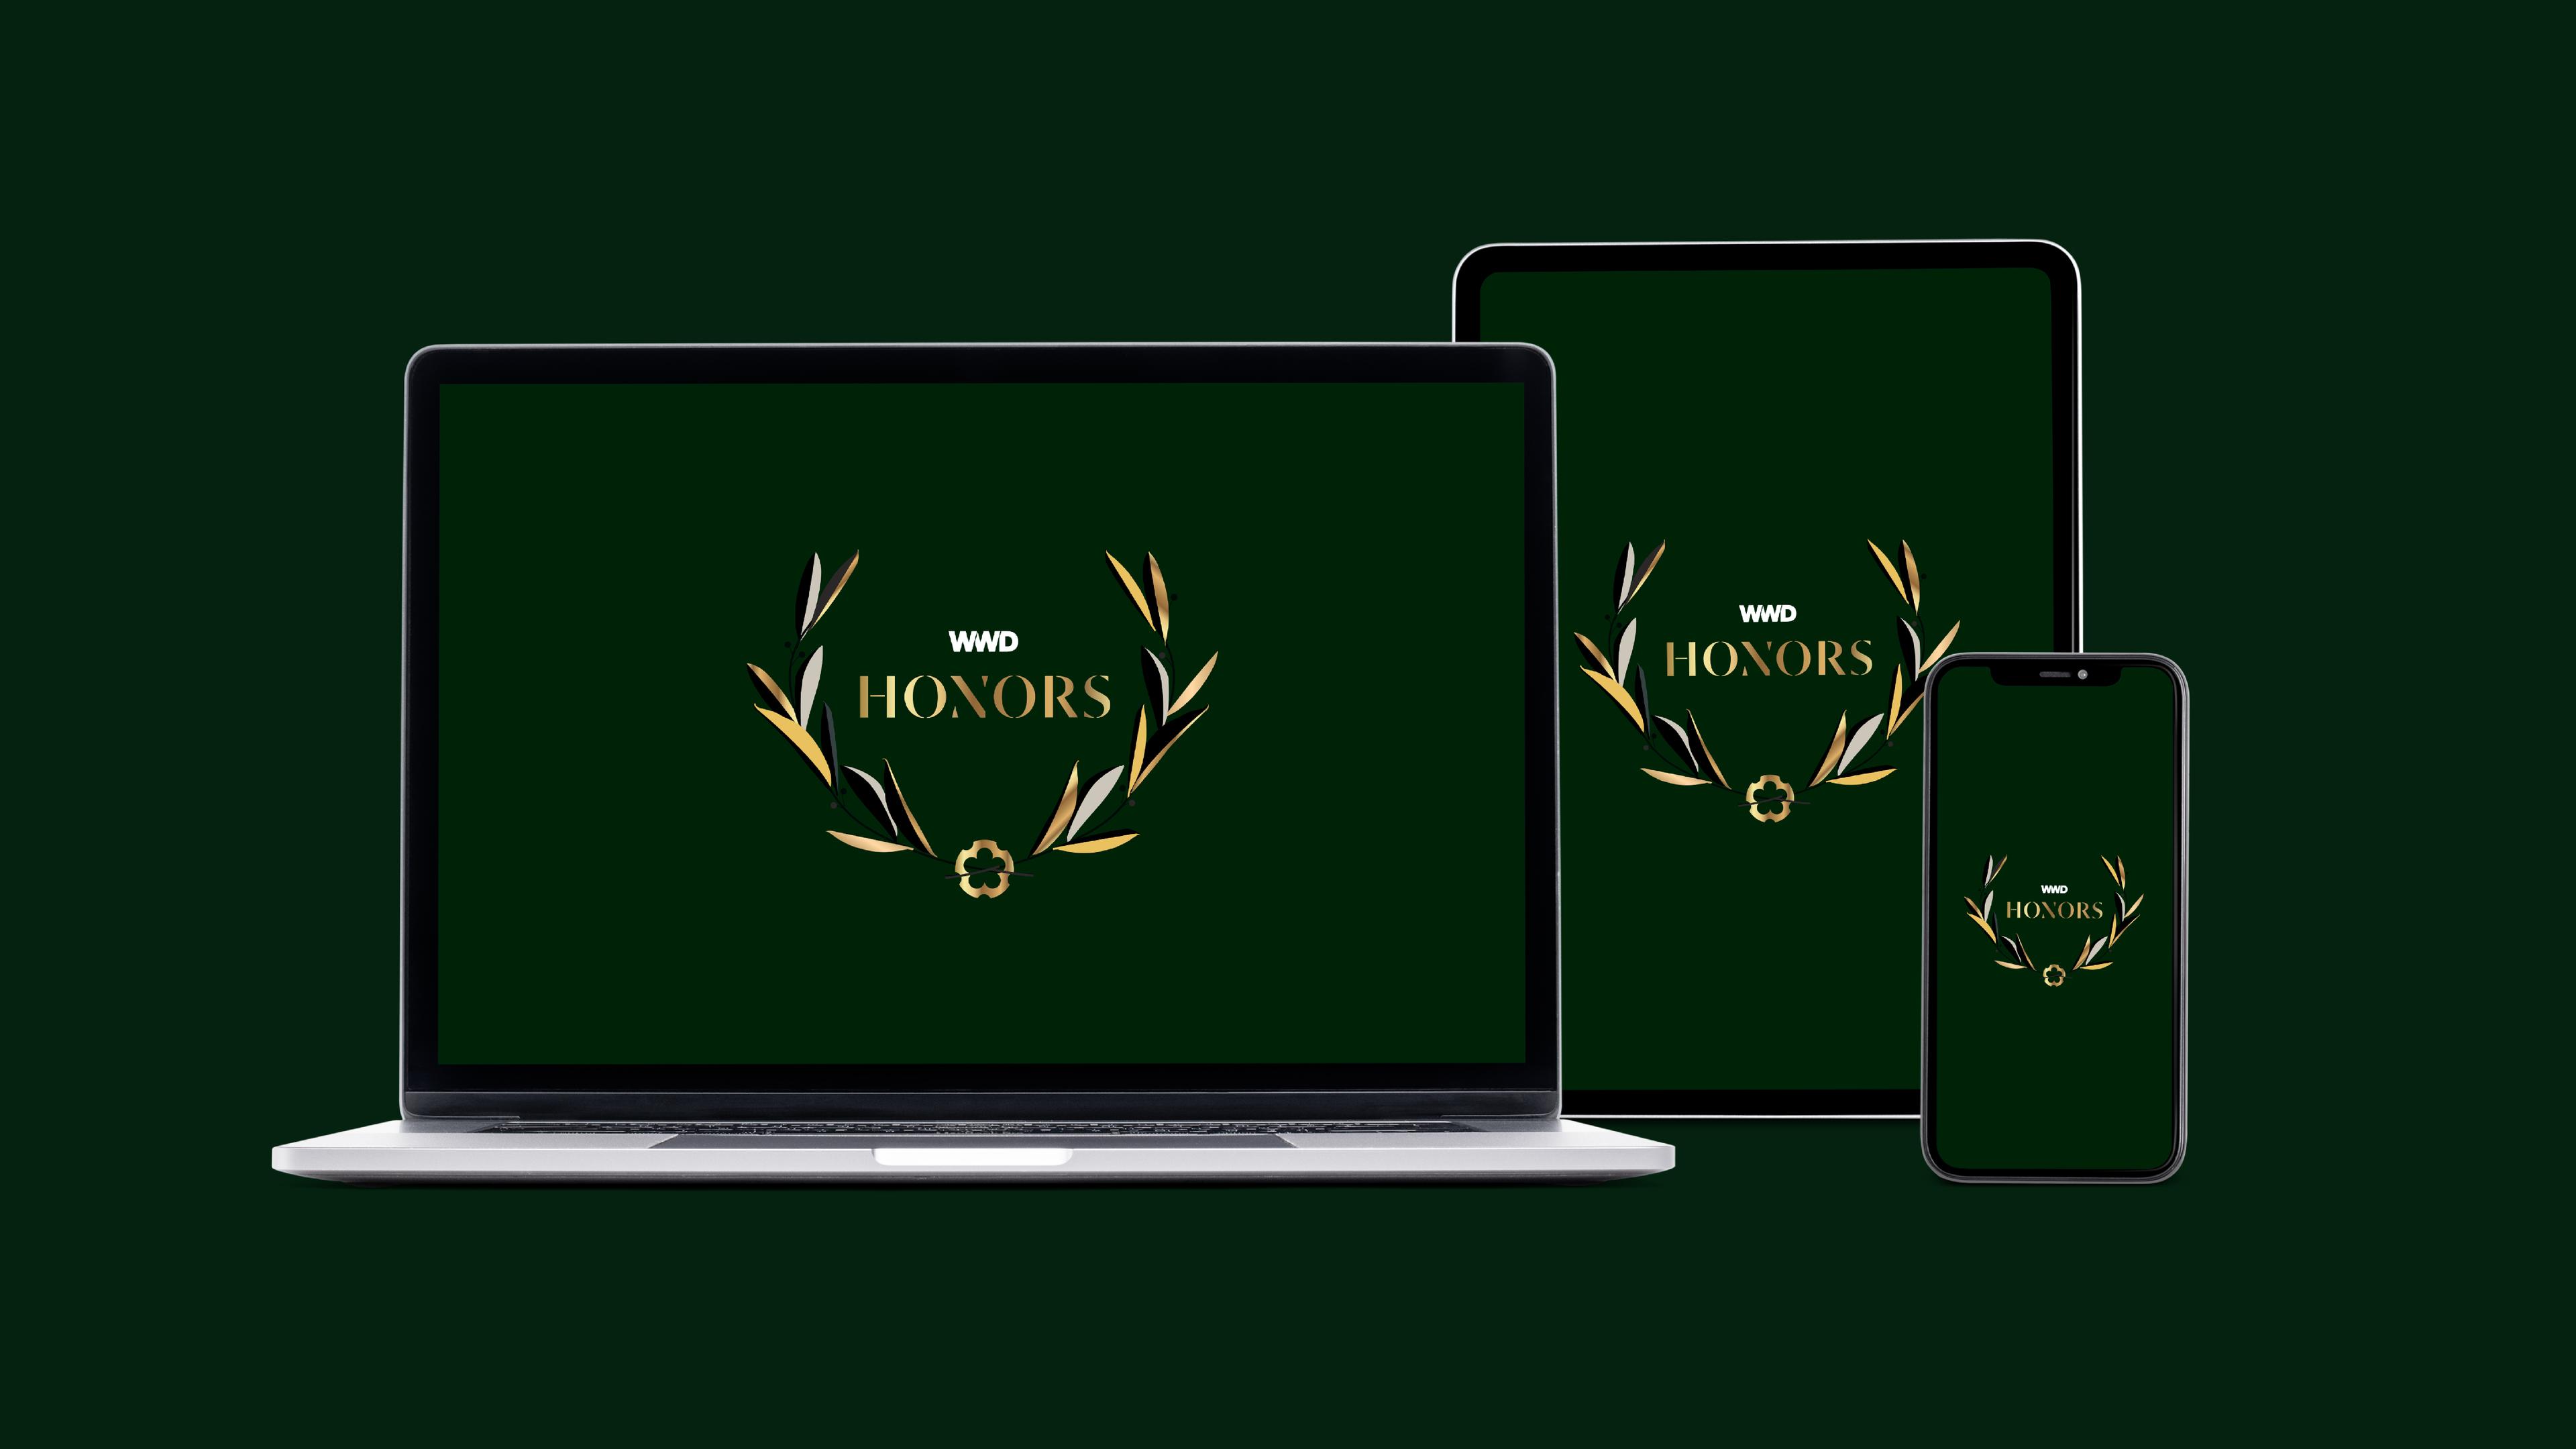 WWD Honors branding on the screens of a laptop, iPad and iPhone